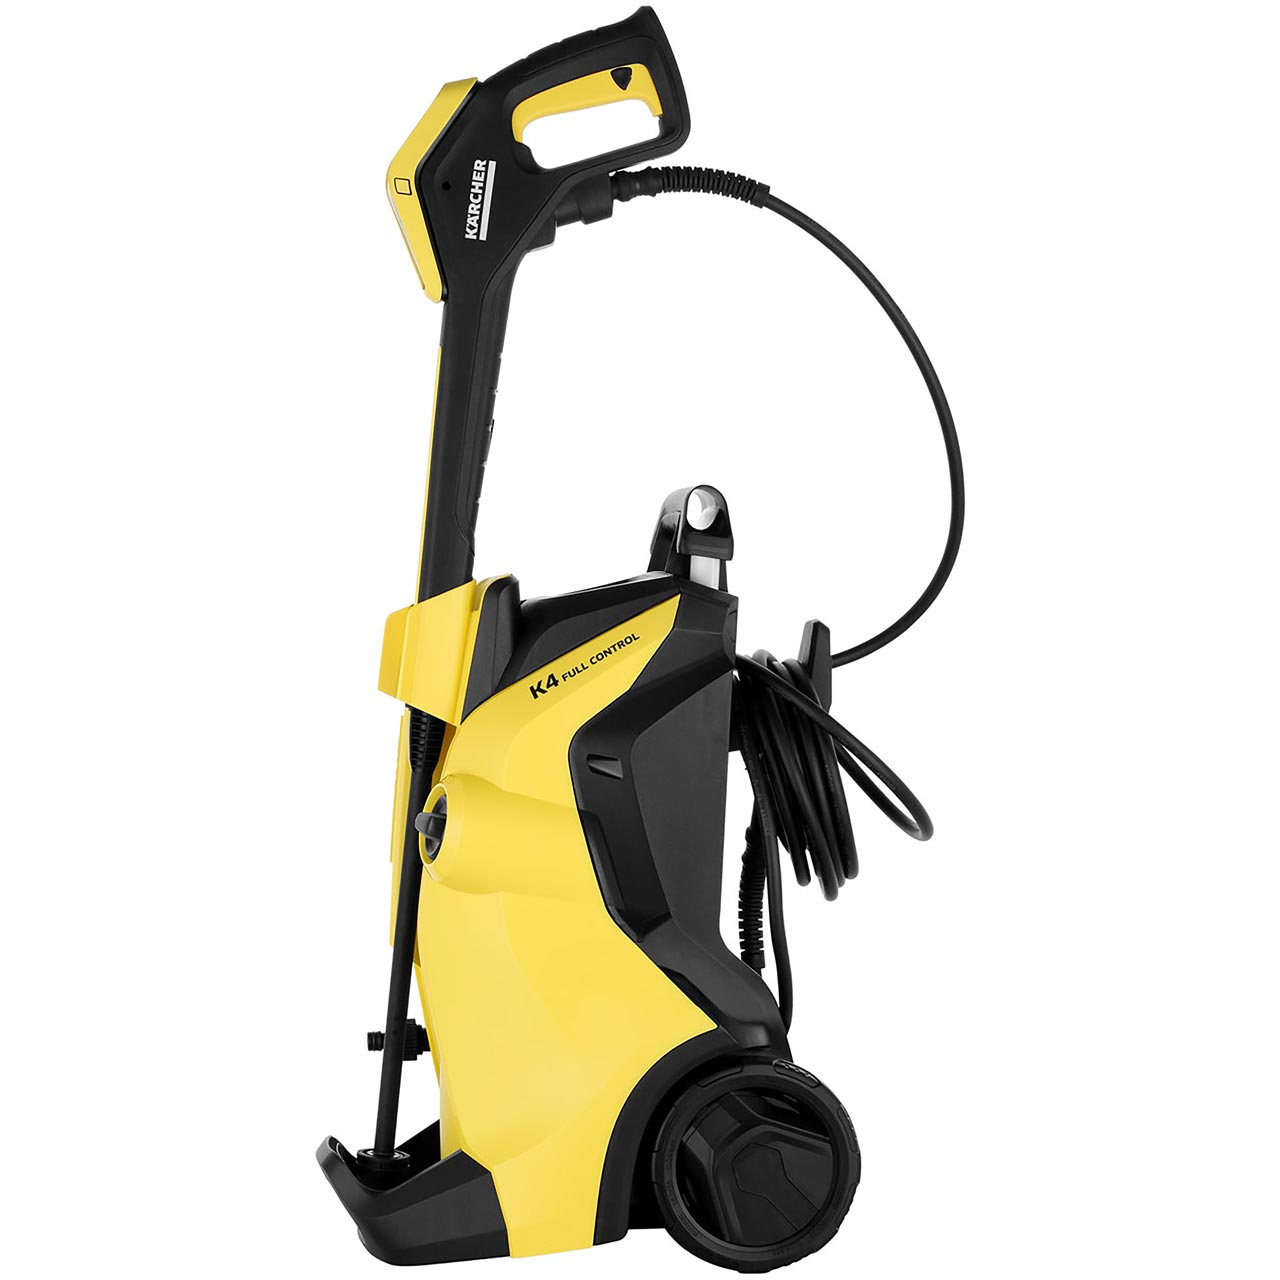 Karcher K4 Full Control Home Pressure Washer With T350 Patio Cleaner 130 Bar 641113714059 Ebay